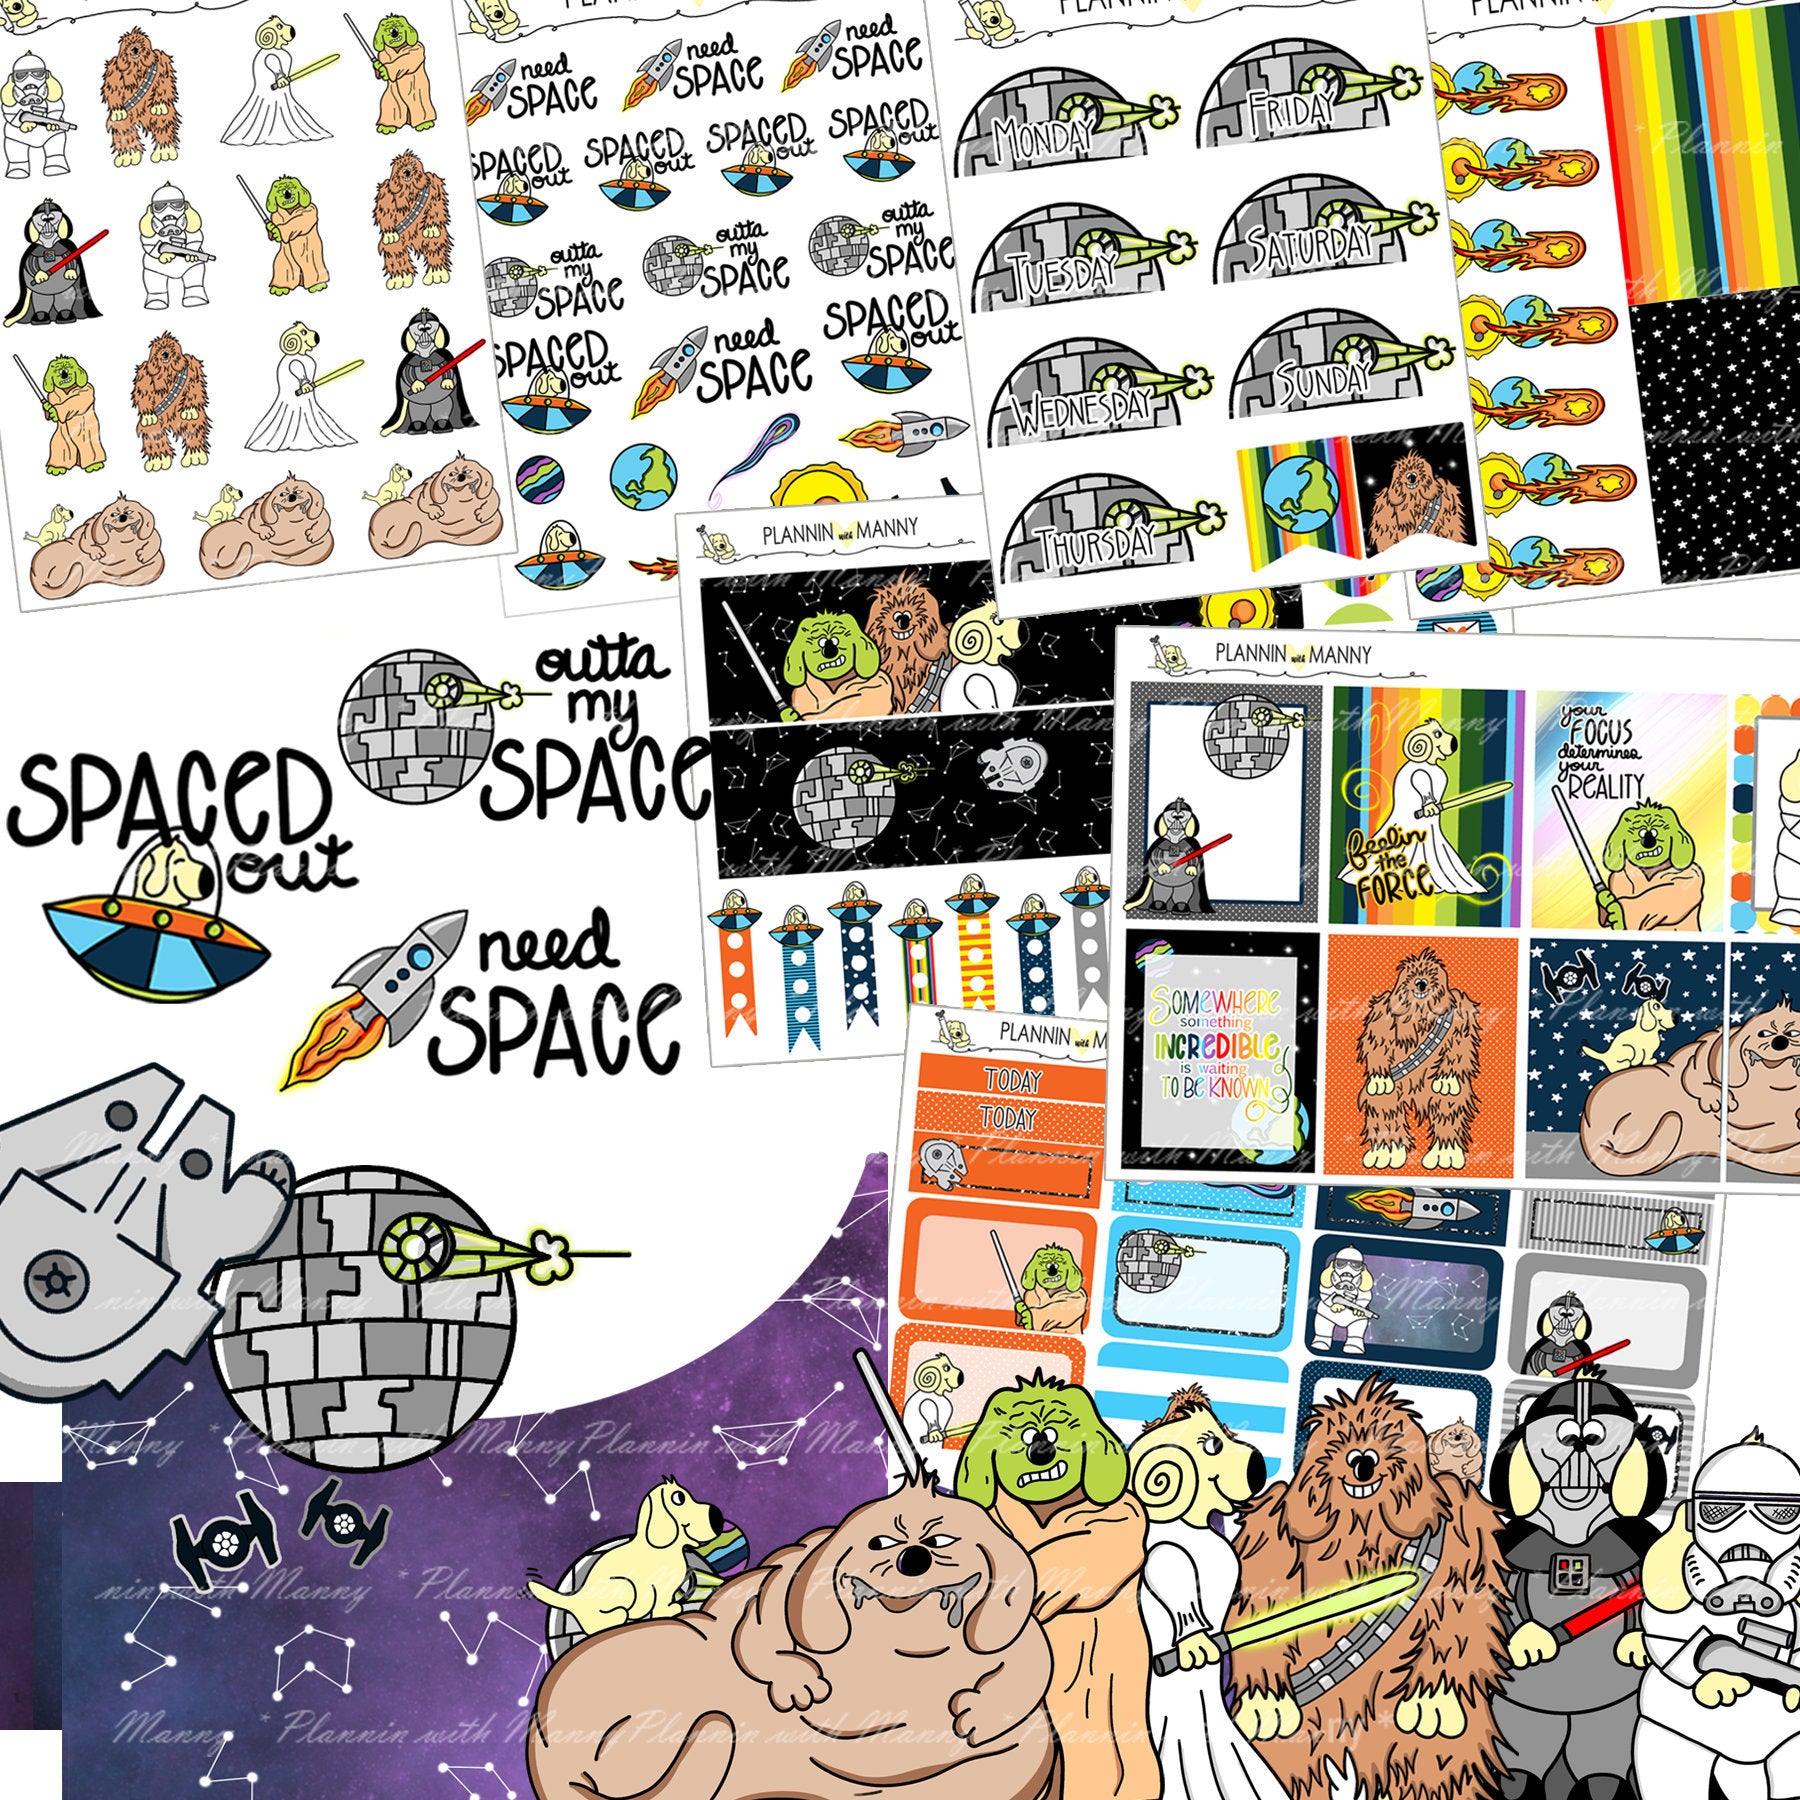 720 KIT,MEGA FORCE Kit, Ec Vertical Set, Space Planner Stickers, Dog Planner Stickers, Hand Drawn Stickers,Ec Weekly Kits